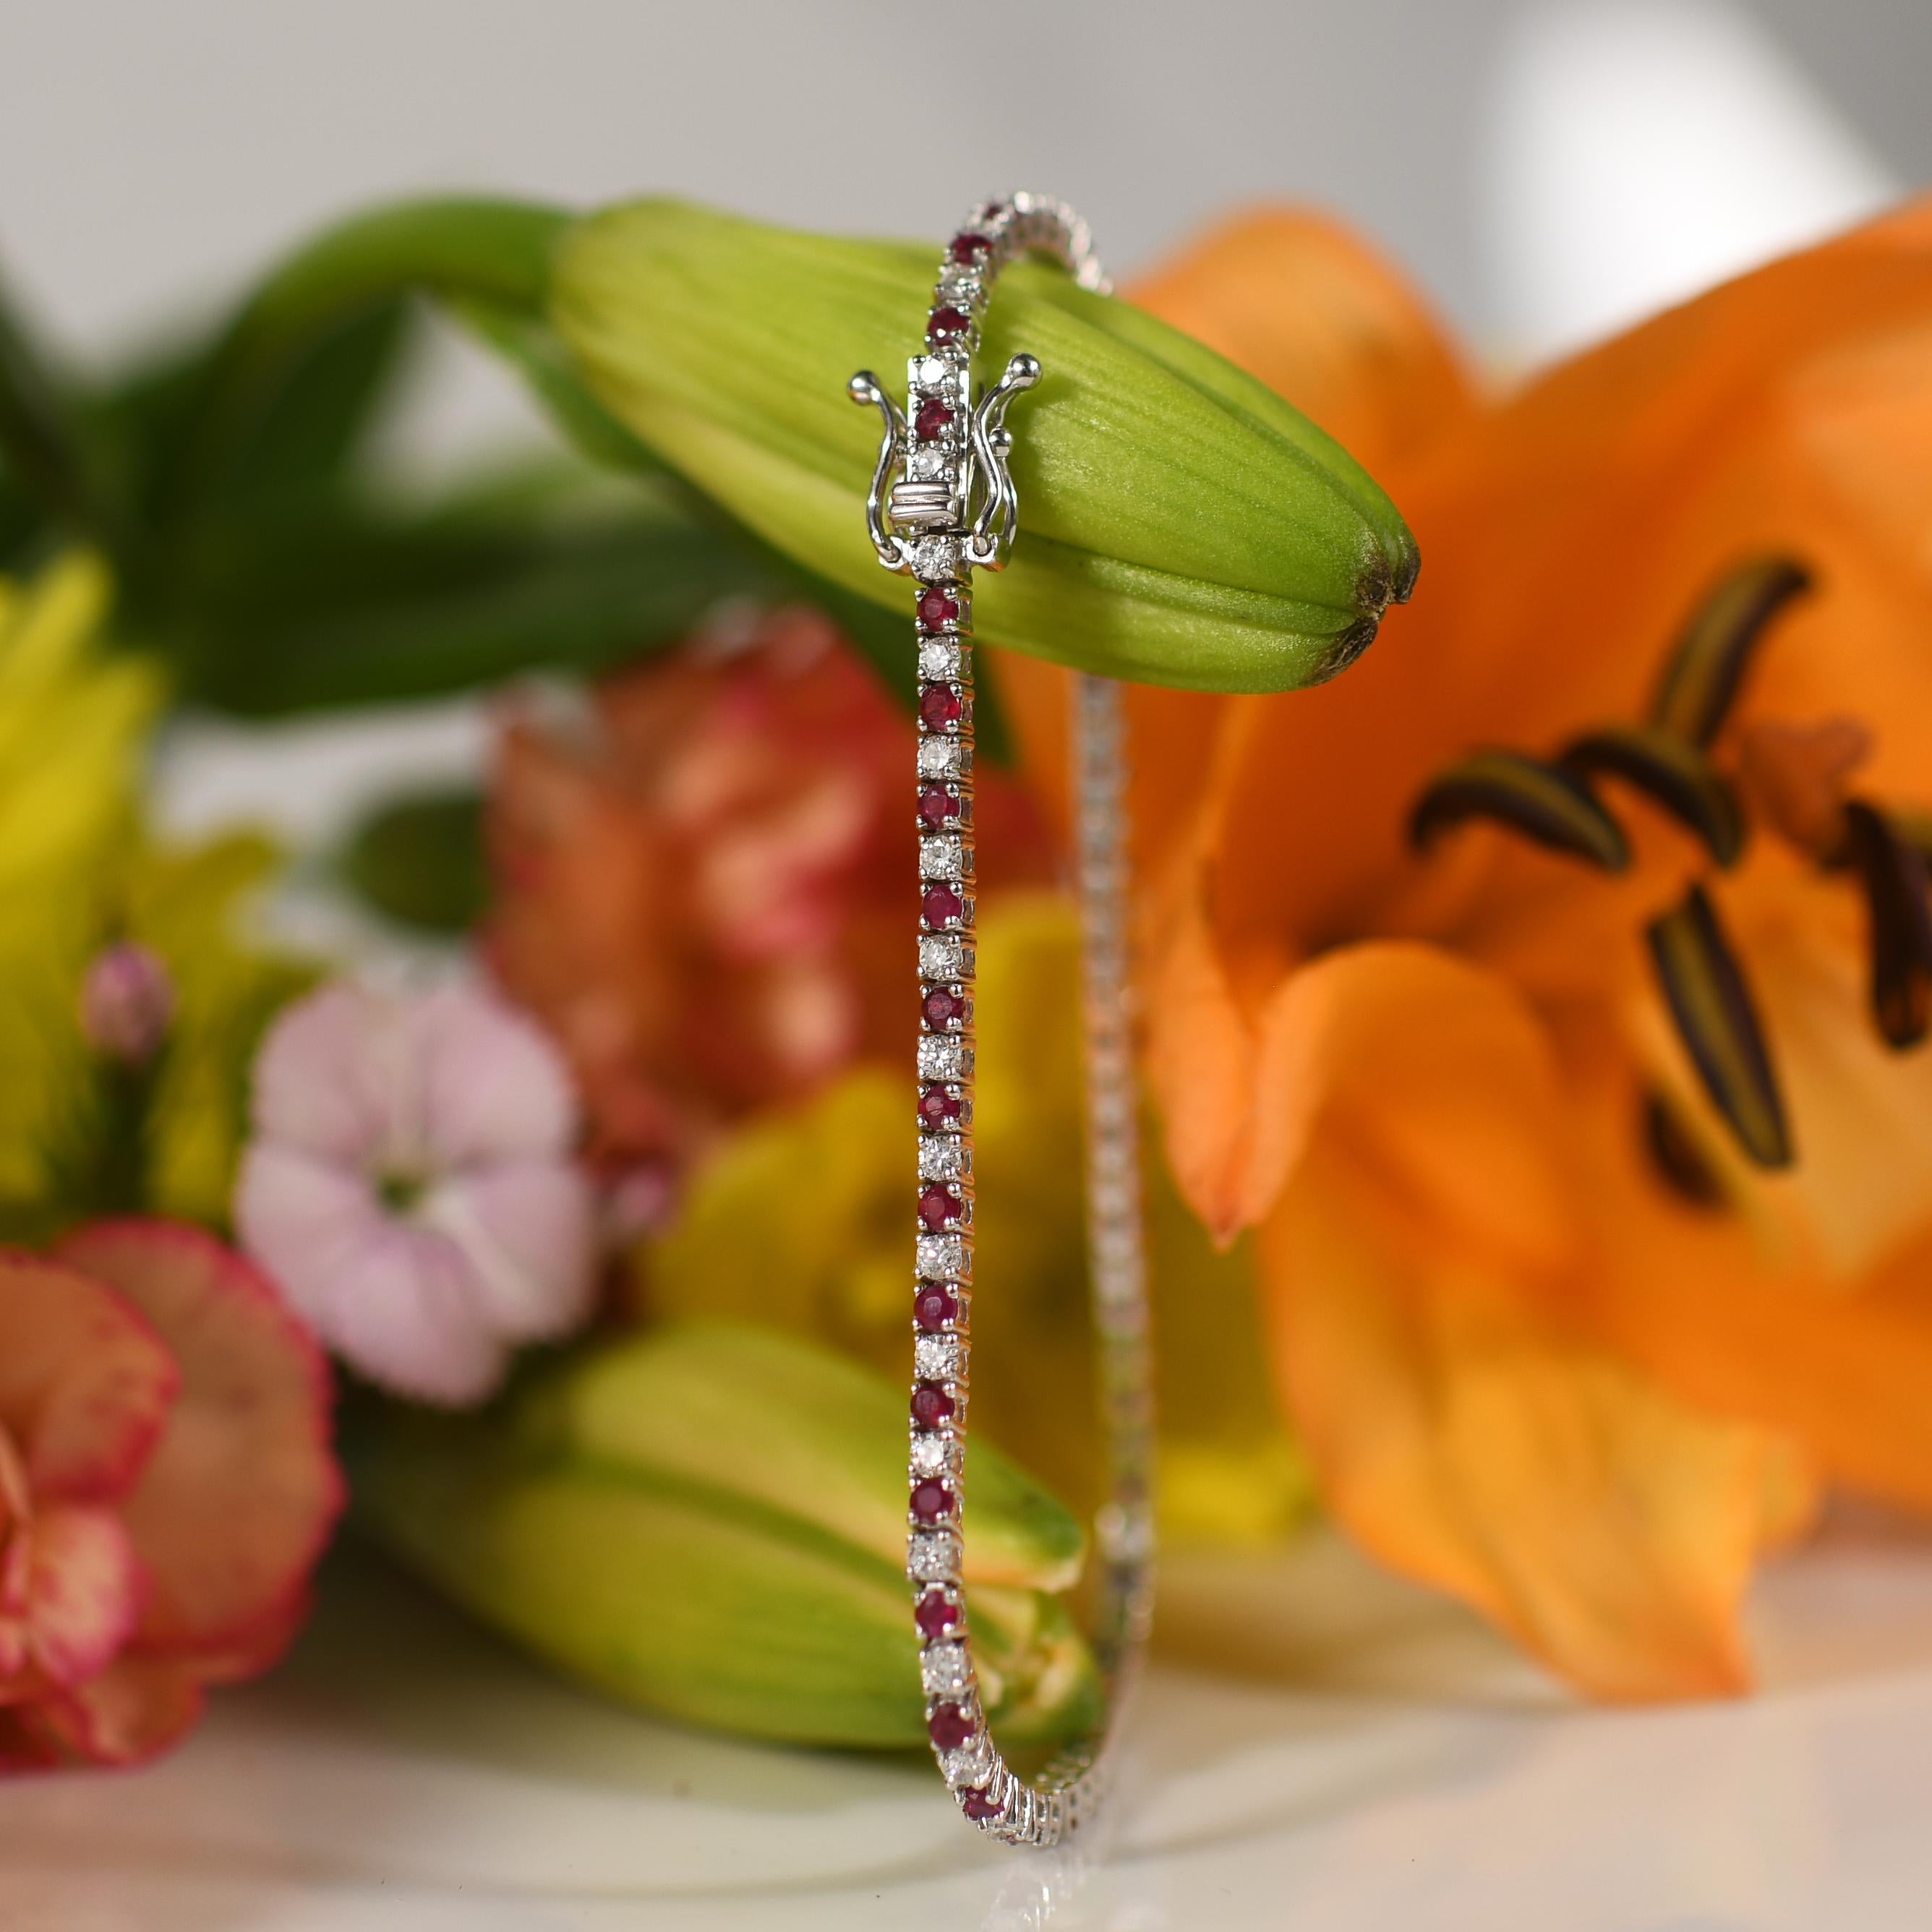 Radiating with timeless allure, this stunning bracelet boasts a total weight of 2.57 carats, adorned with radiant rubies and dazzling diamonds. Crafted from gleaming 14K white gold, its intricate design showcases the fiery red hue of the rubies